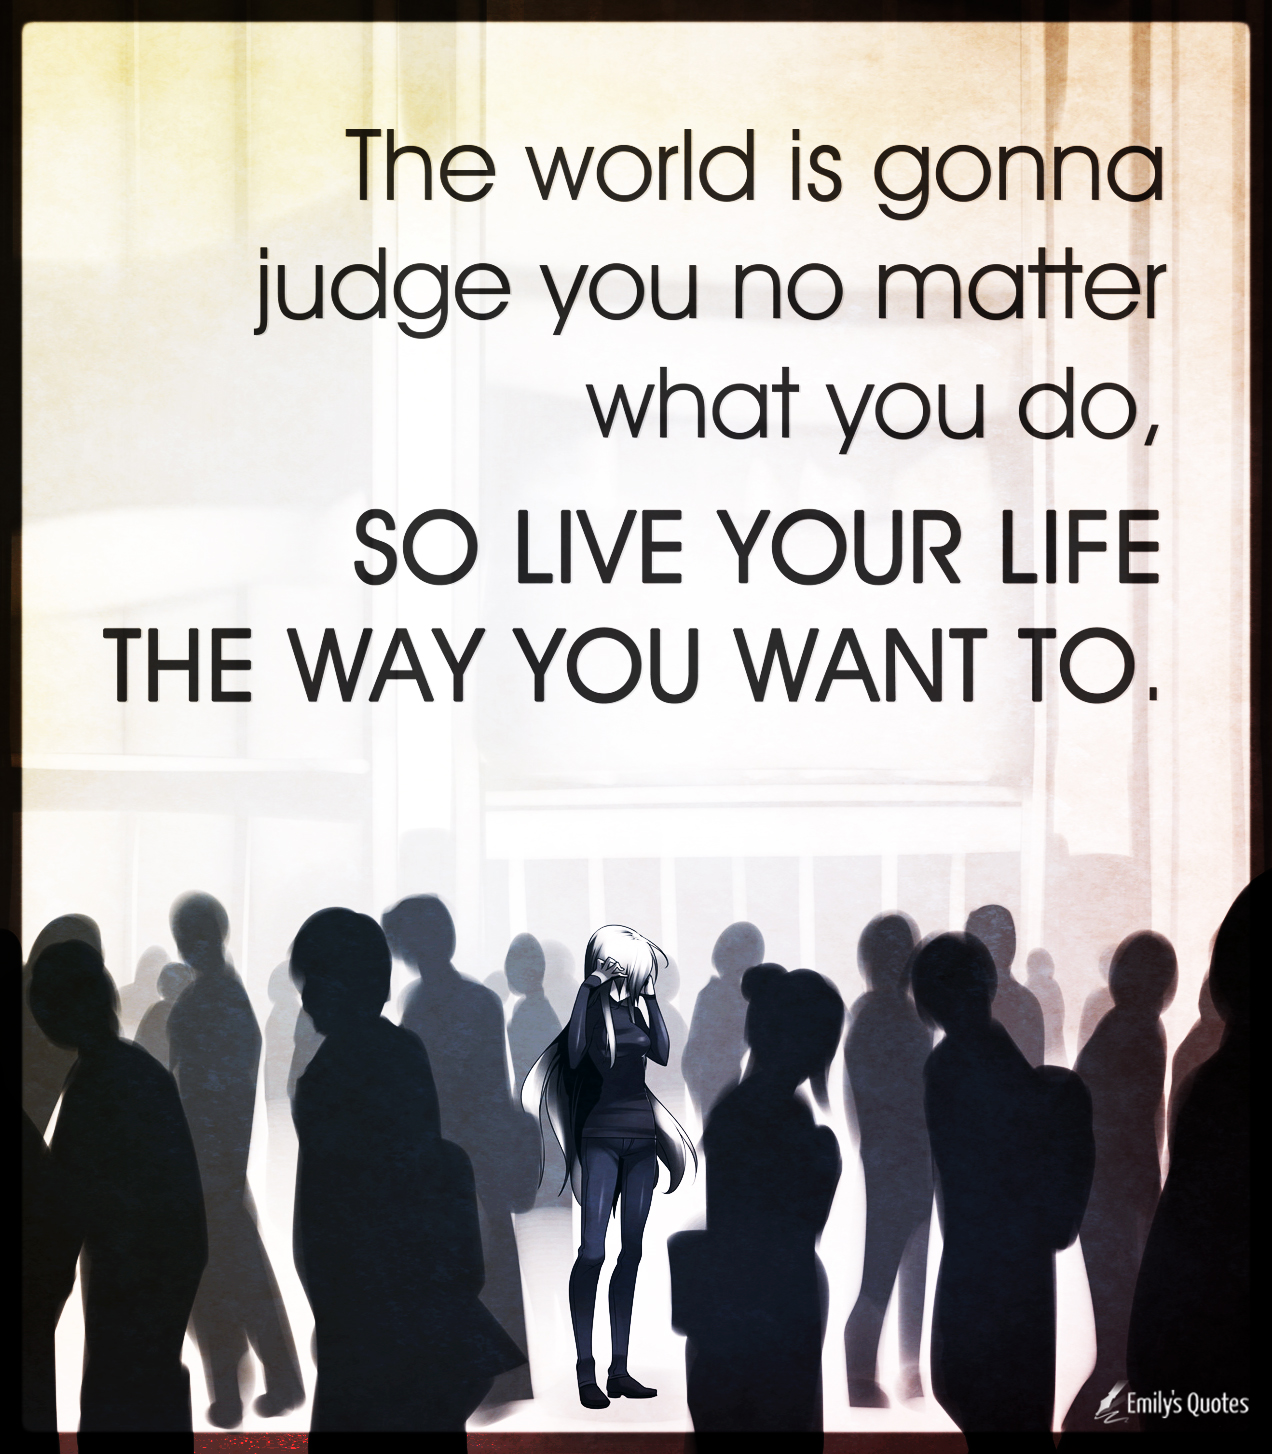 The world is gonna judge you no matter what you do, so live your life